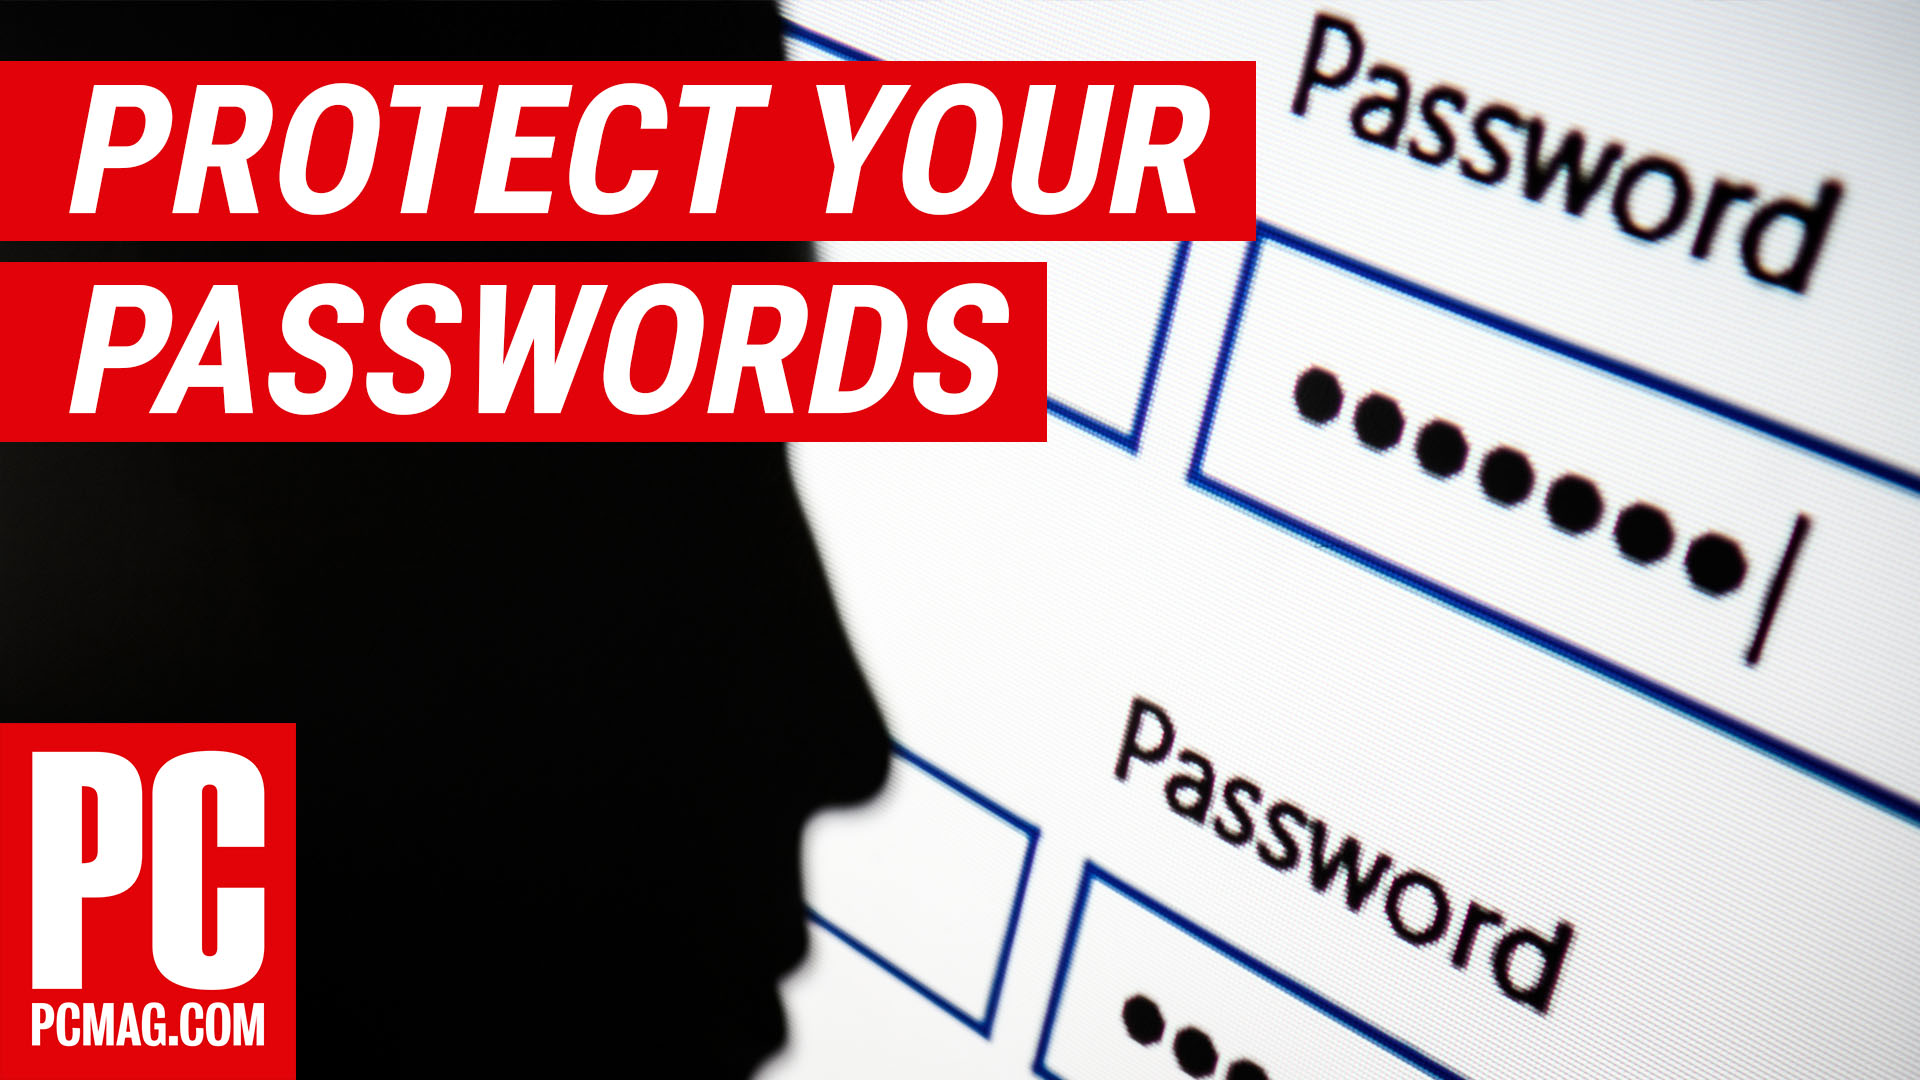 What Is a Password Manager, and Why Do I Need One?